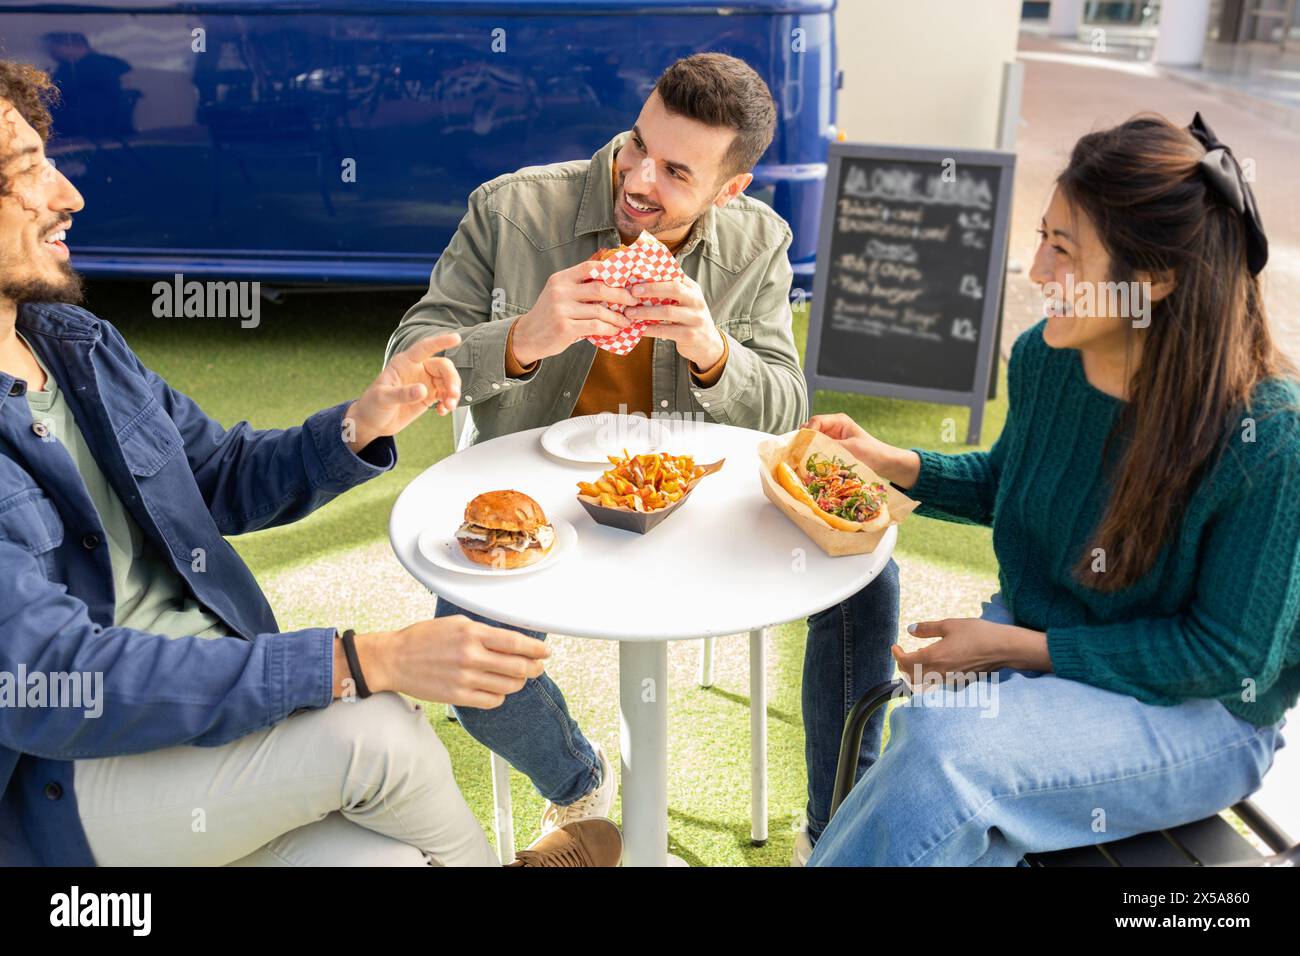 Three friends share a laugh while eating street food from a food truck, seated at an outdoor table in a casual setting Stock Photo